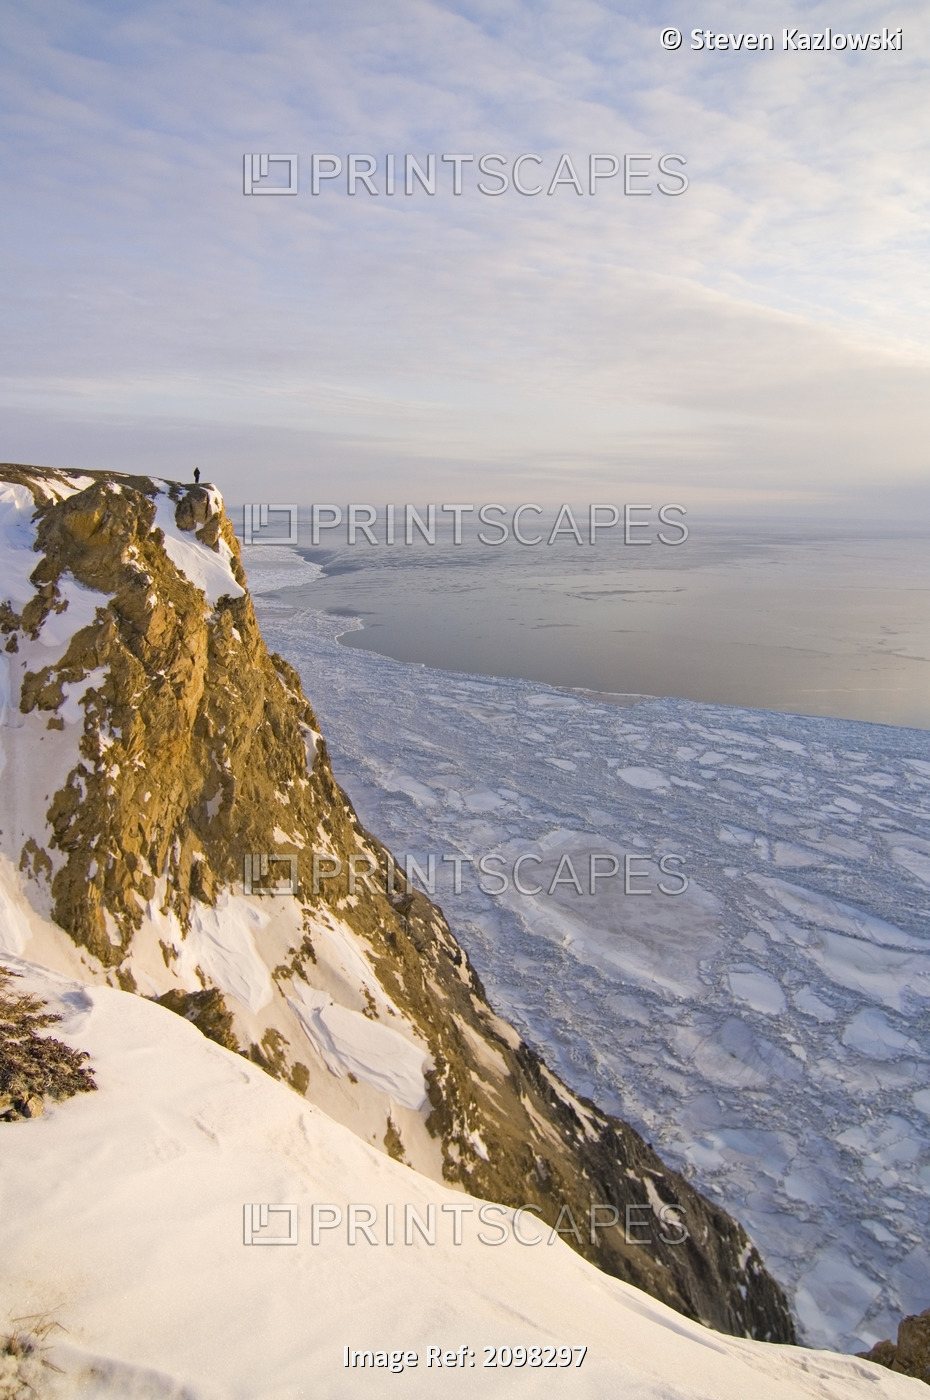 Man On Cliff At Cape Thompson Overlooking Thin Pack Ice On The Chukchi Sea